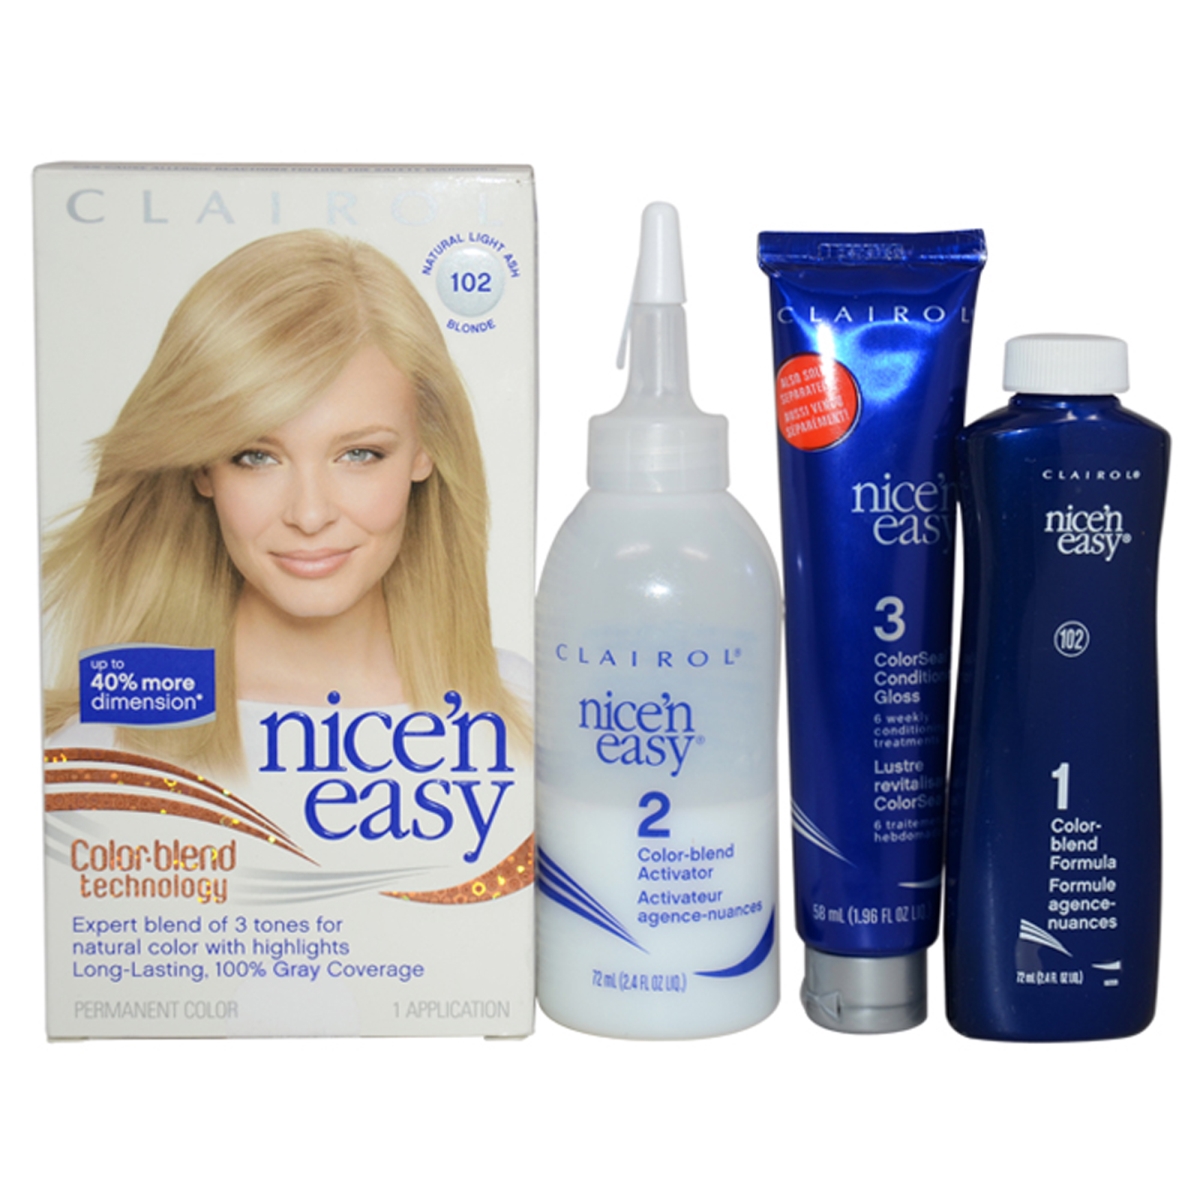 W-hc-1222 Nice N Easy Permanent Hair Color For Women - 9a102 Natural Light Ash Blonde